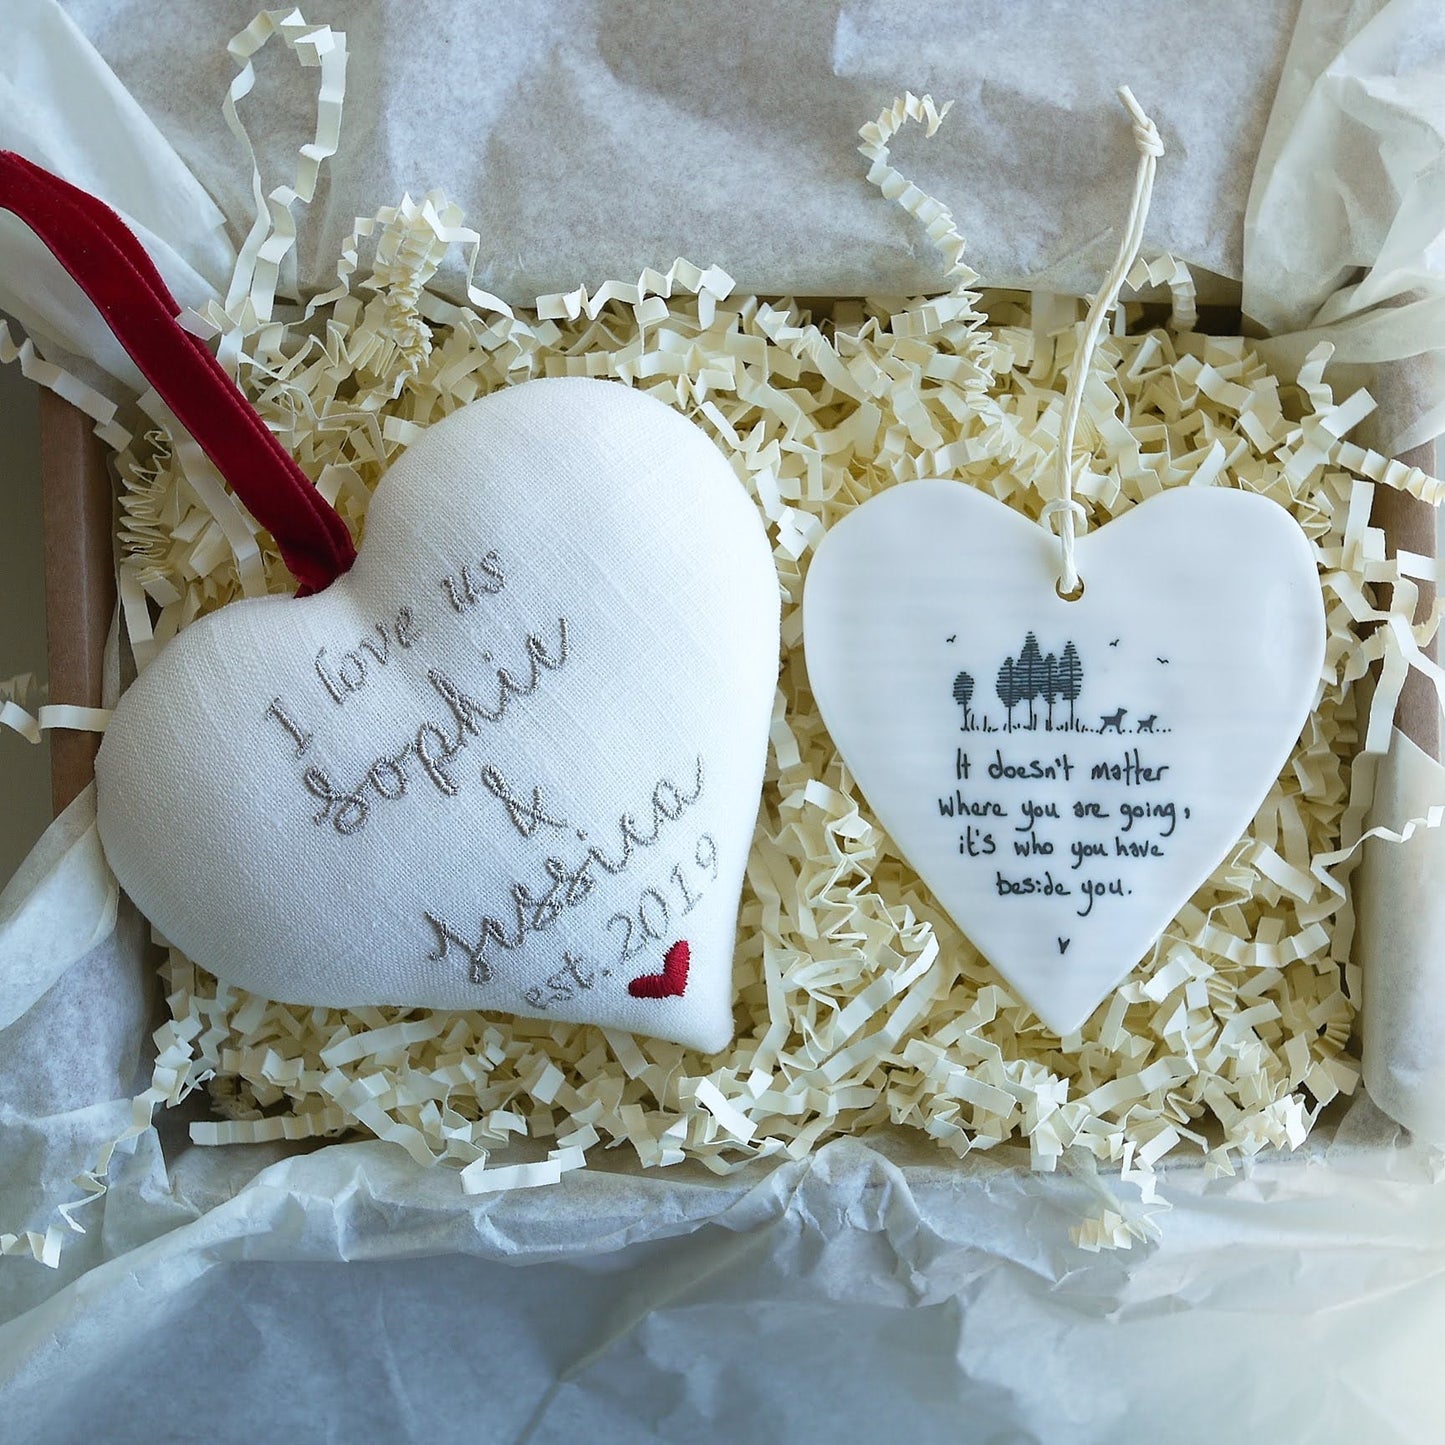 Valentines Day ’I Love Us’ Gift Heart with Porcelain Heart Decoration Personalised Valentine’s Day Gifts